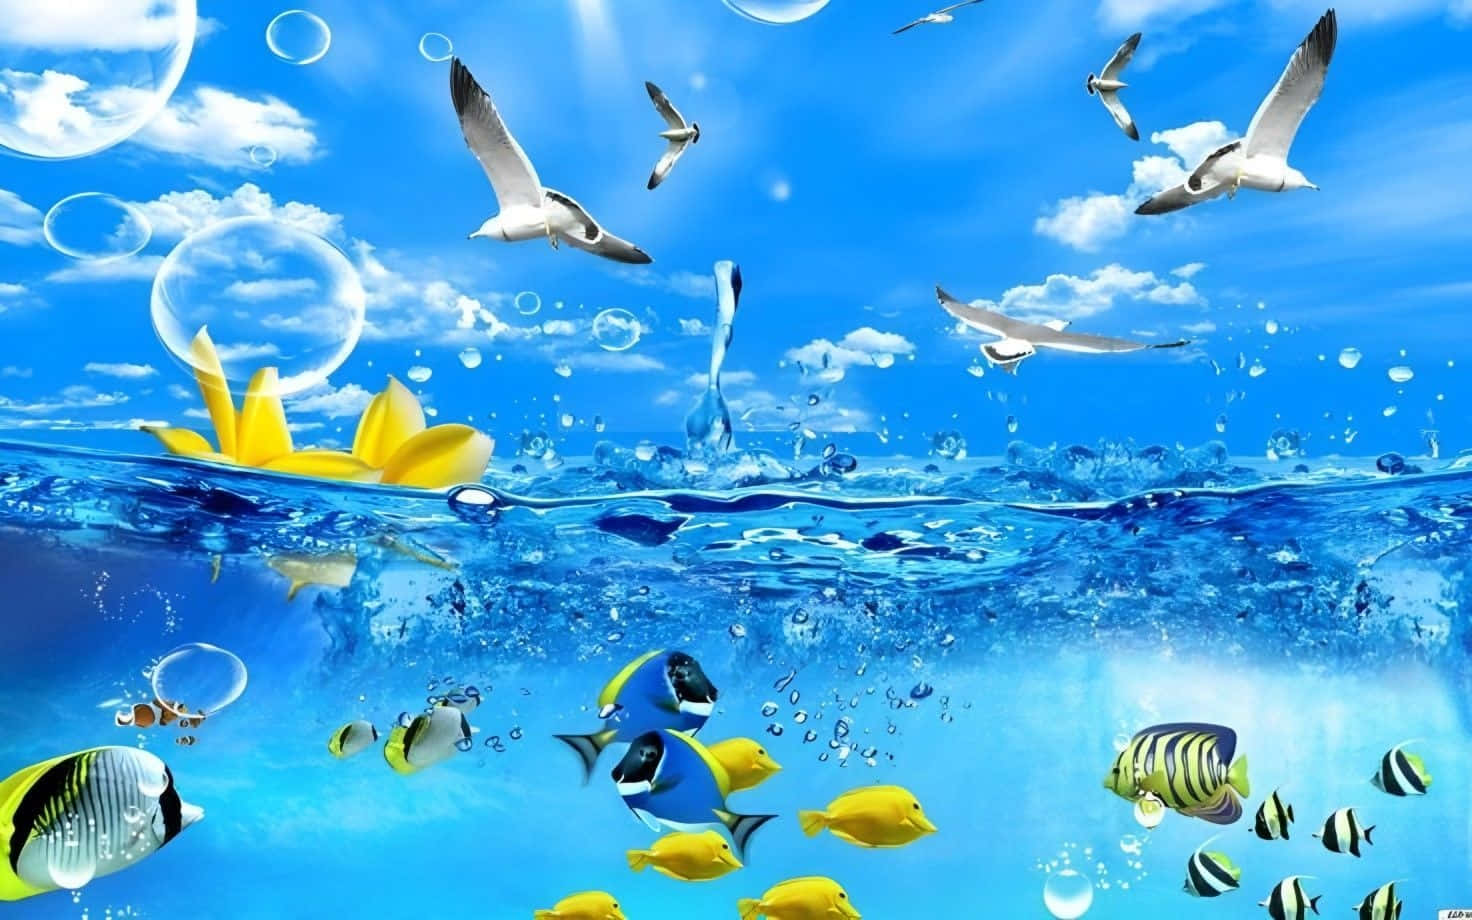 Underwater_ Serenity_with_ Seagulls_and_ Tropical_ Fish.jpg Wallpaper